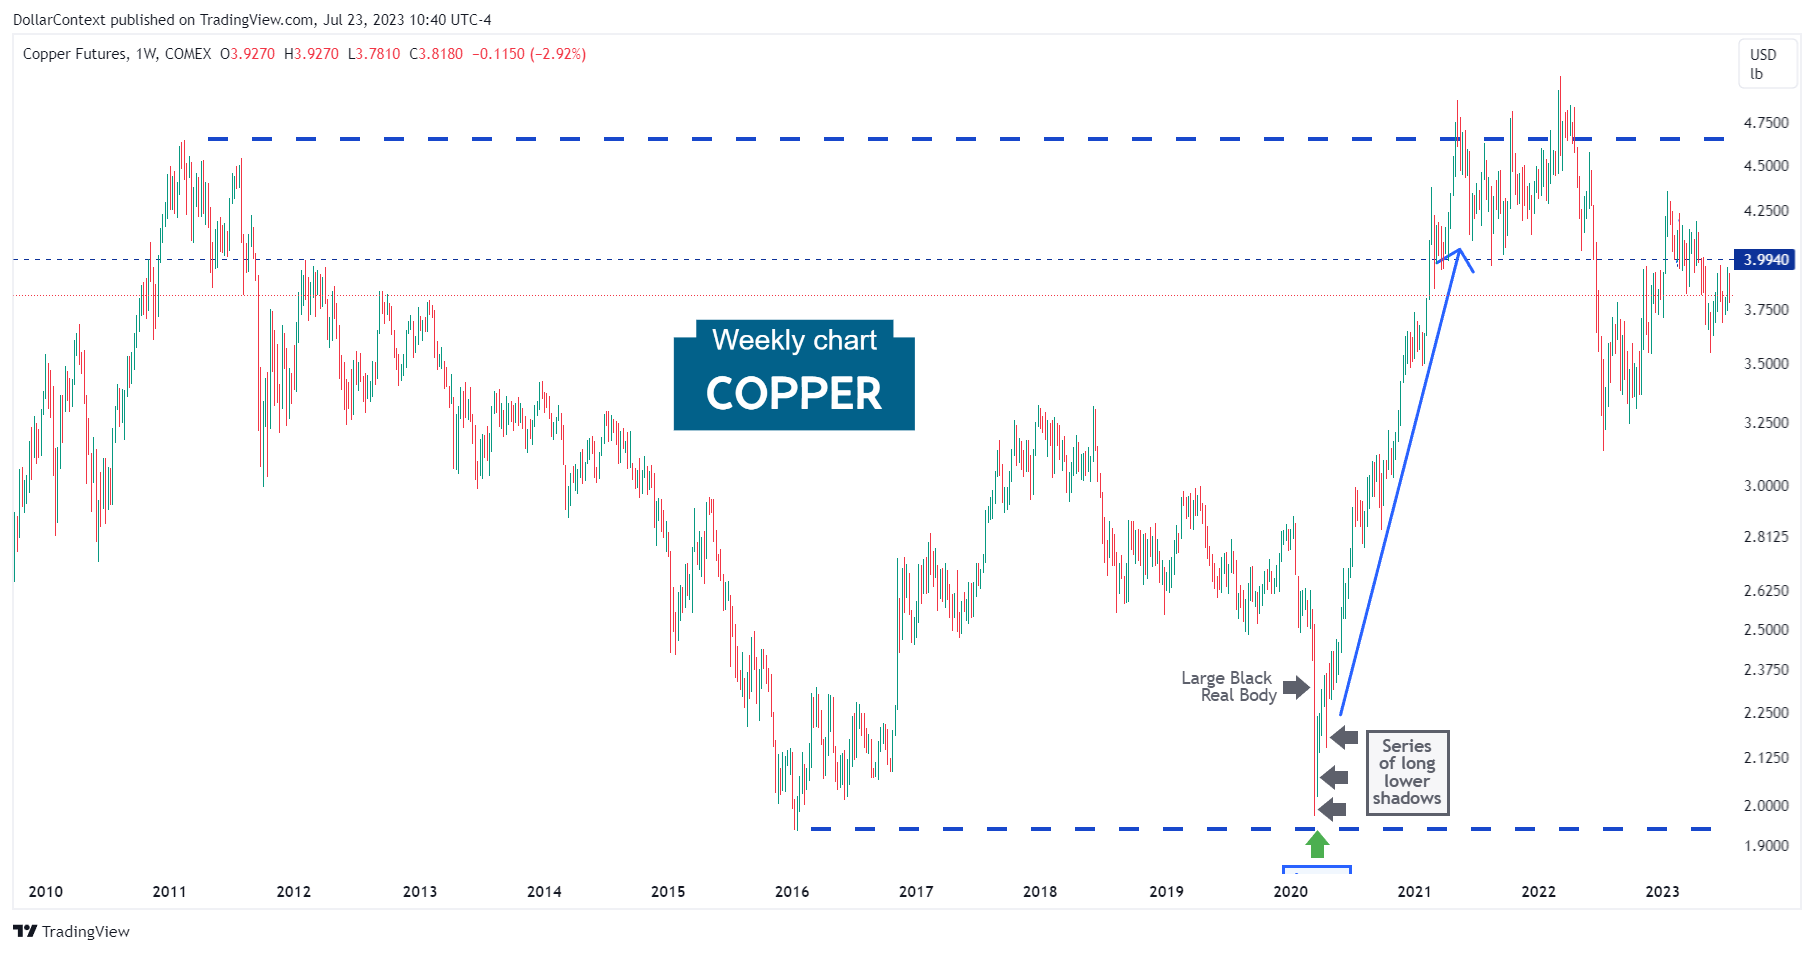 Copper Futures: Rally from April 2020 to May 2021